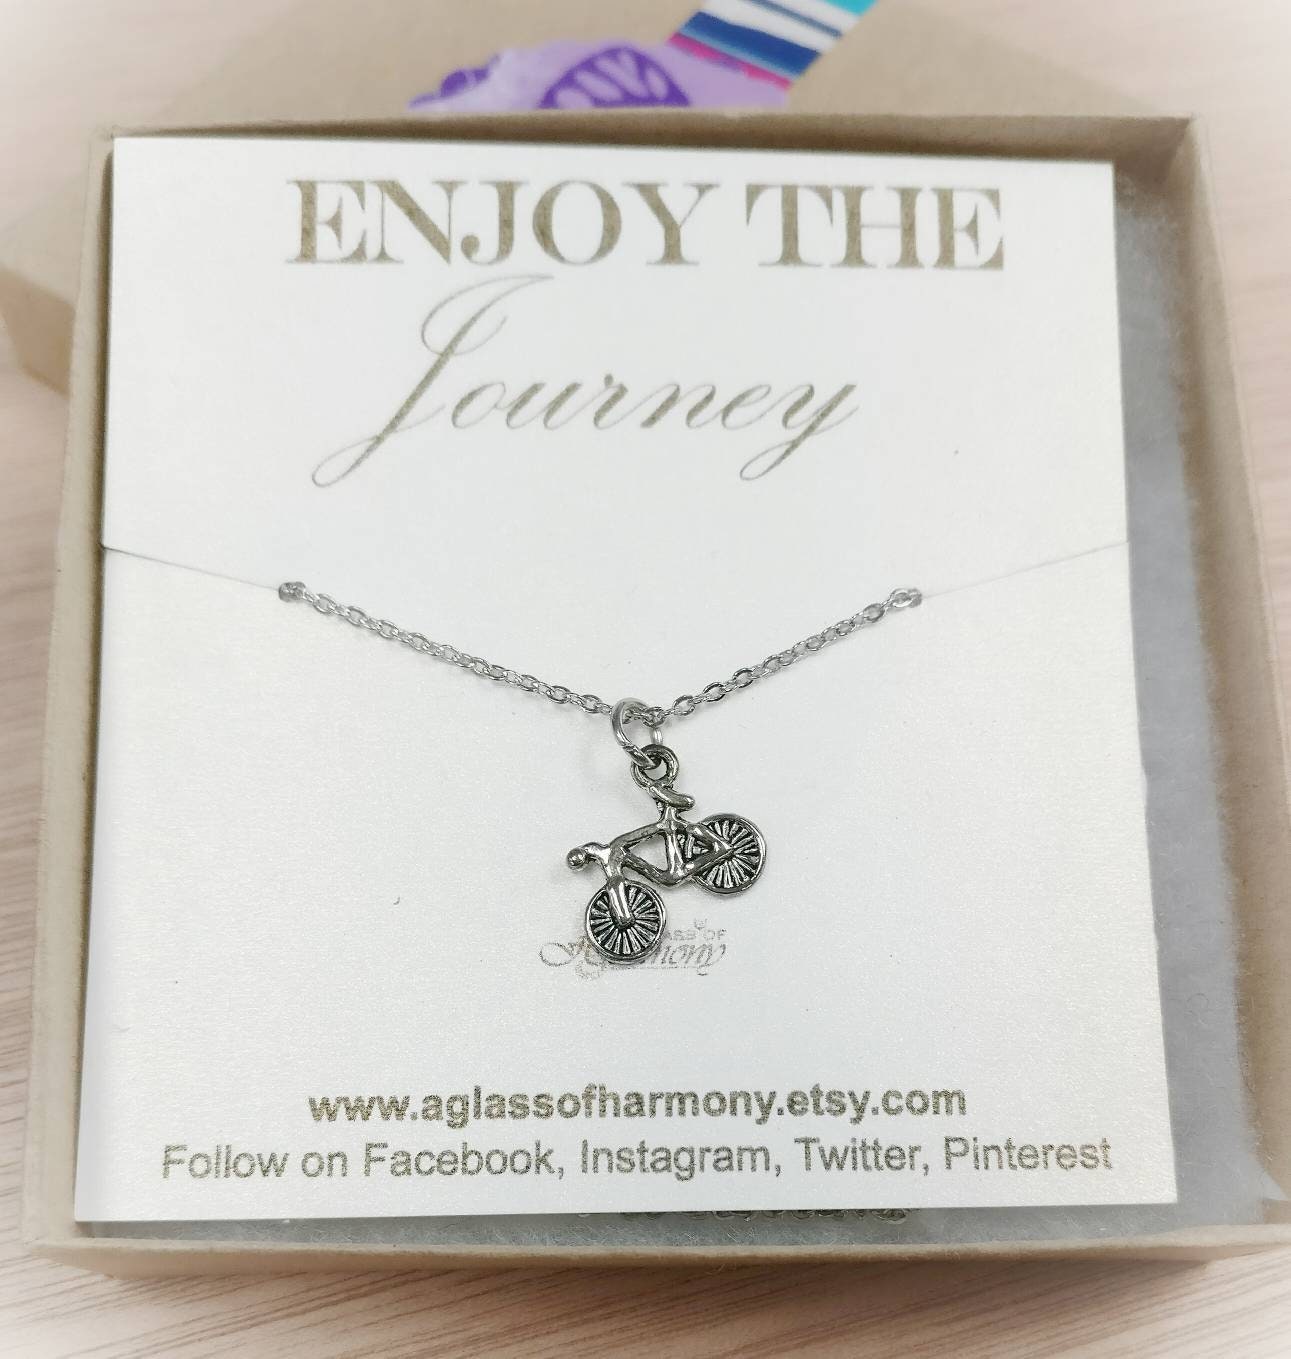 Bicycle Charm Necklace, Graduation Gift, Ready to give Boxed Necklace, Enjoy the Journey, Travel Gift, Motivational Gift, Bicycle Necklace